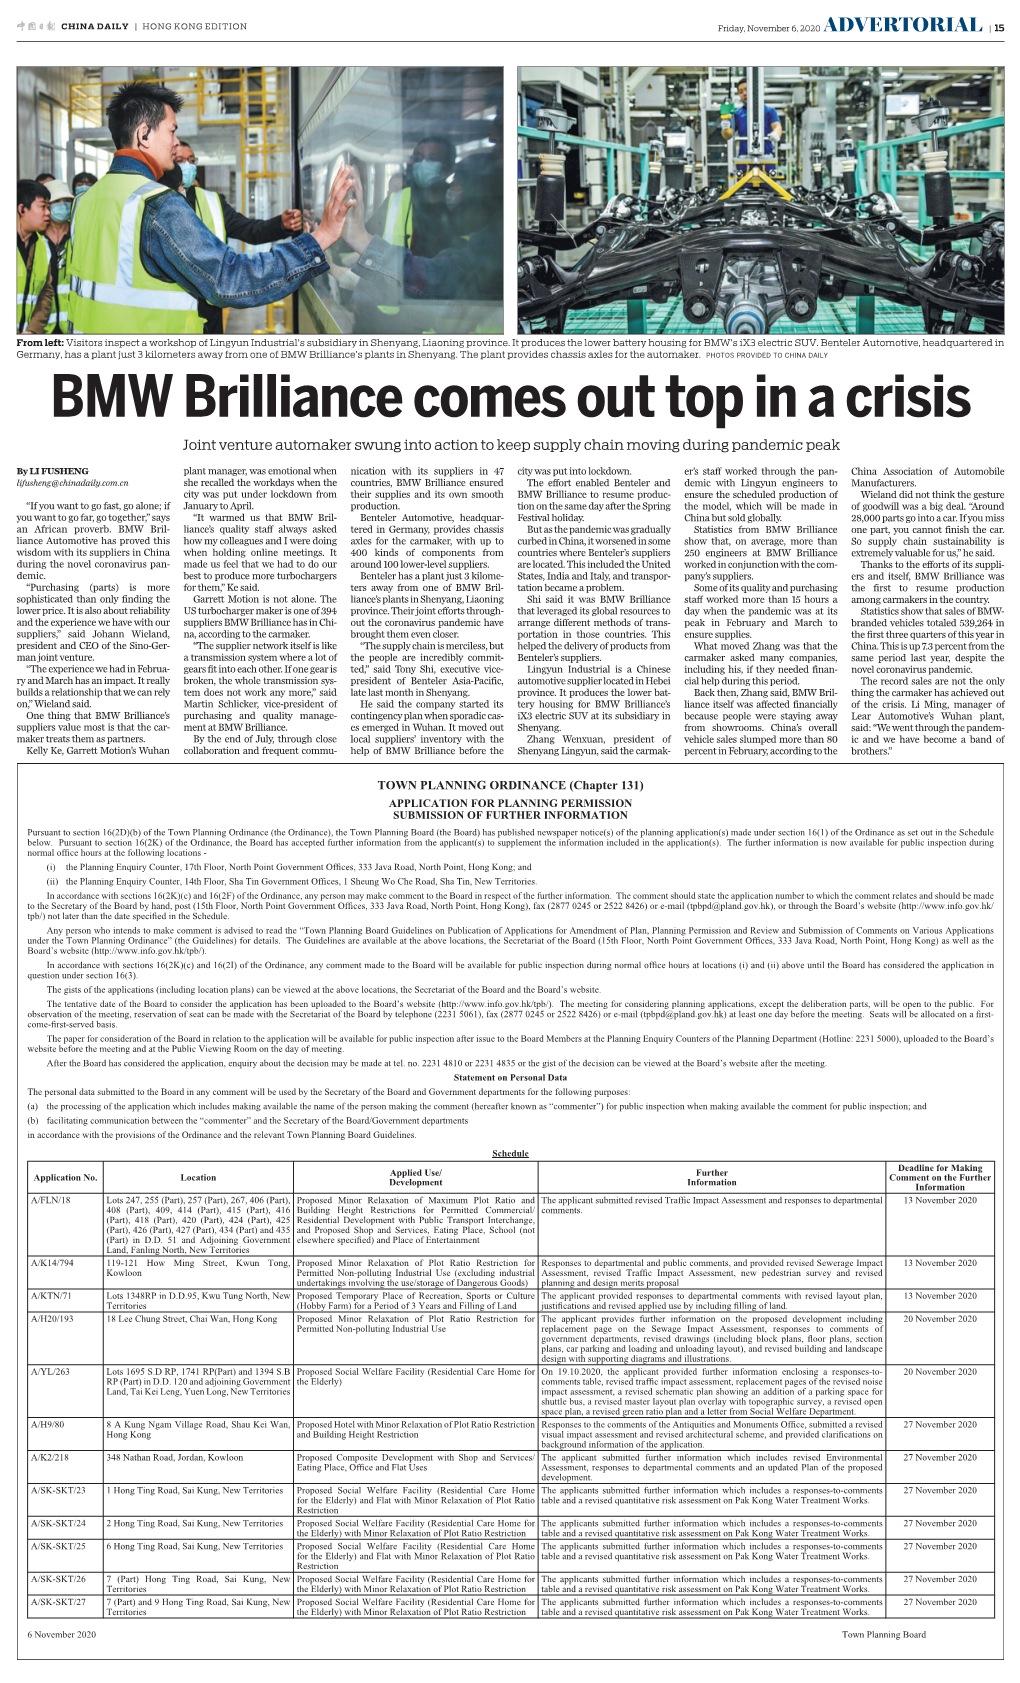 BMW Brilliance Comes out Top in a Crisis Joint Venture Automaker Swung Into Action to Keep Supply Chain Moving During Pandemic Peak